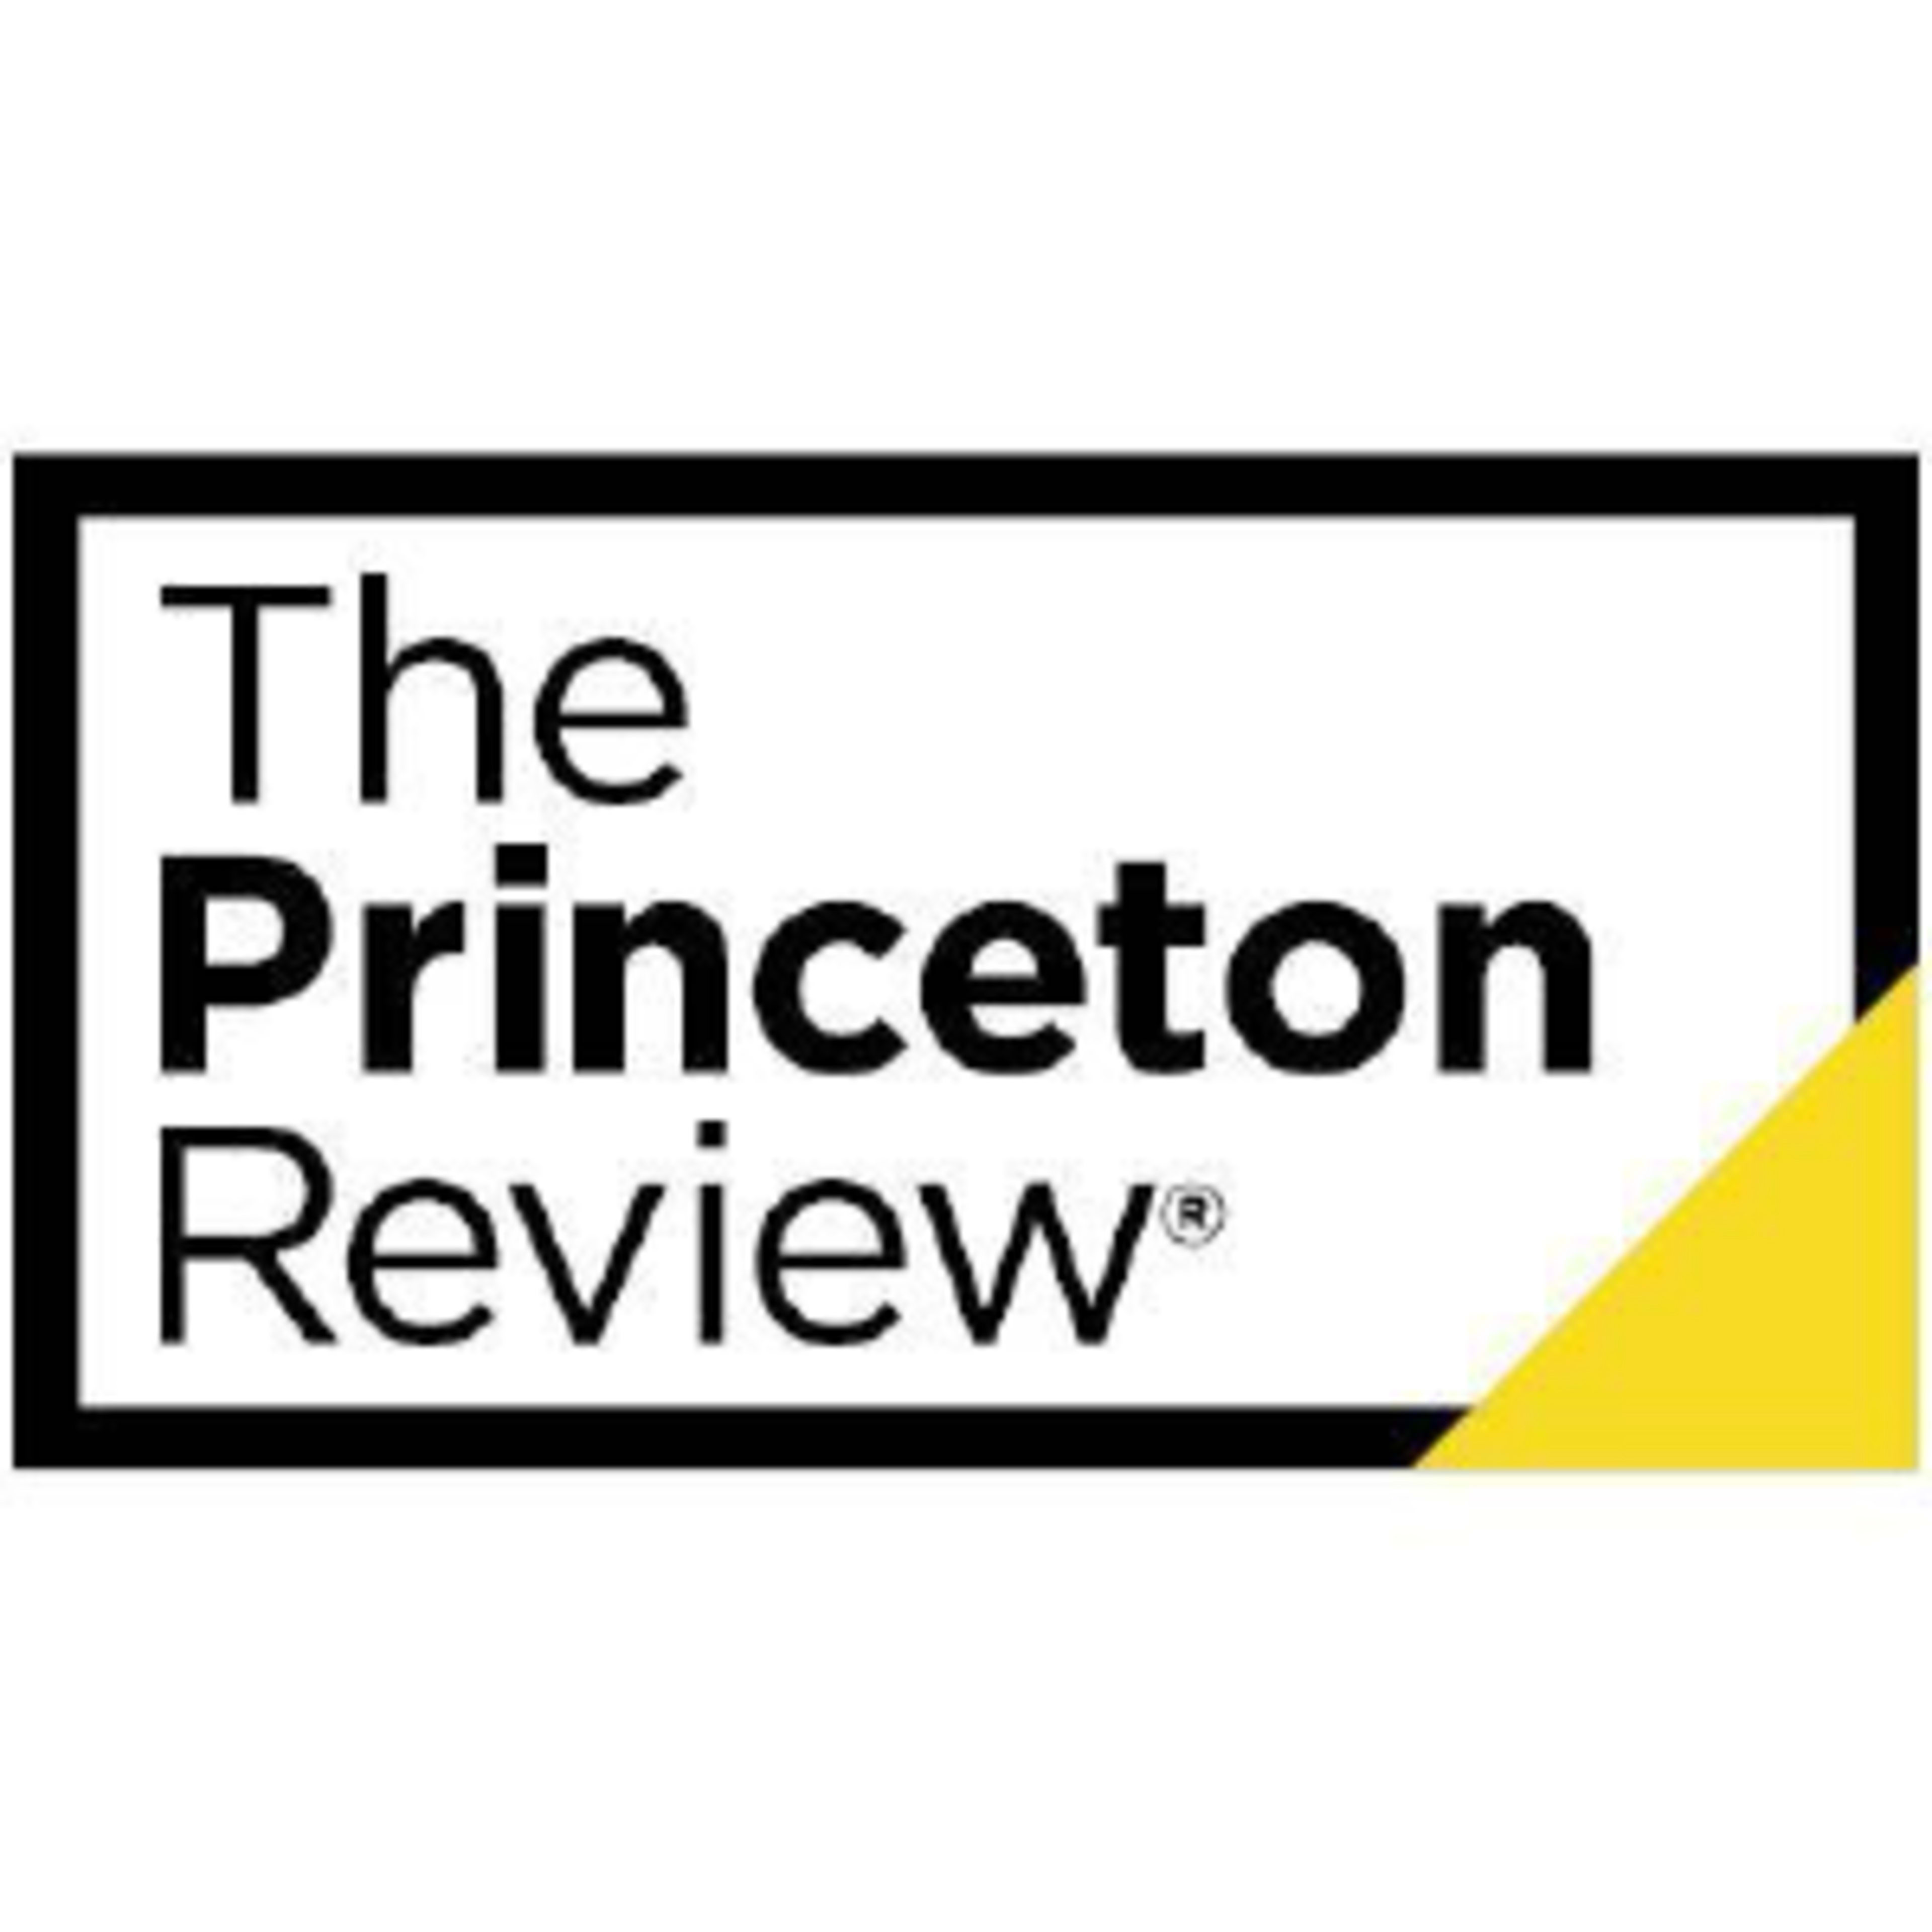 The Princeton ReviewCode